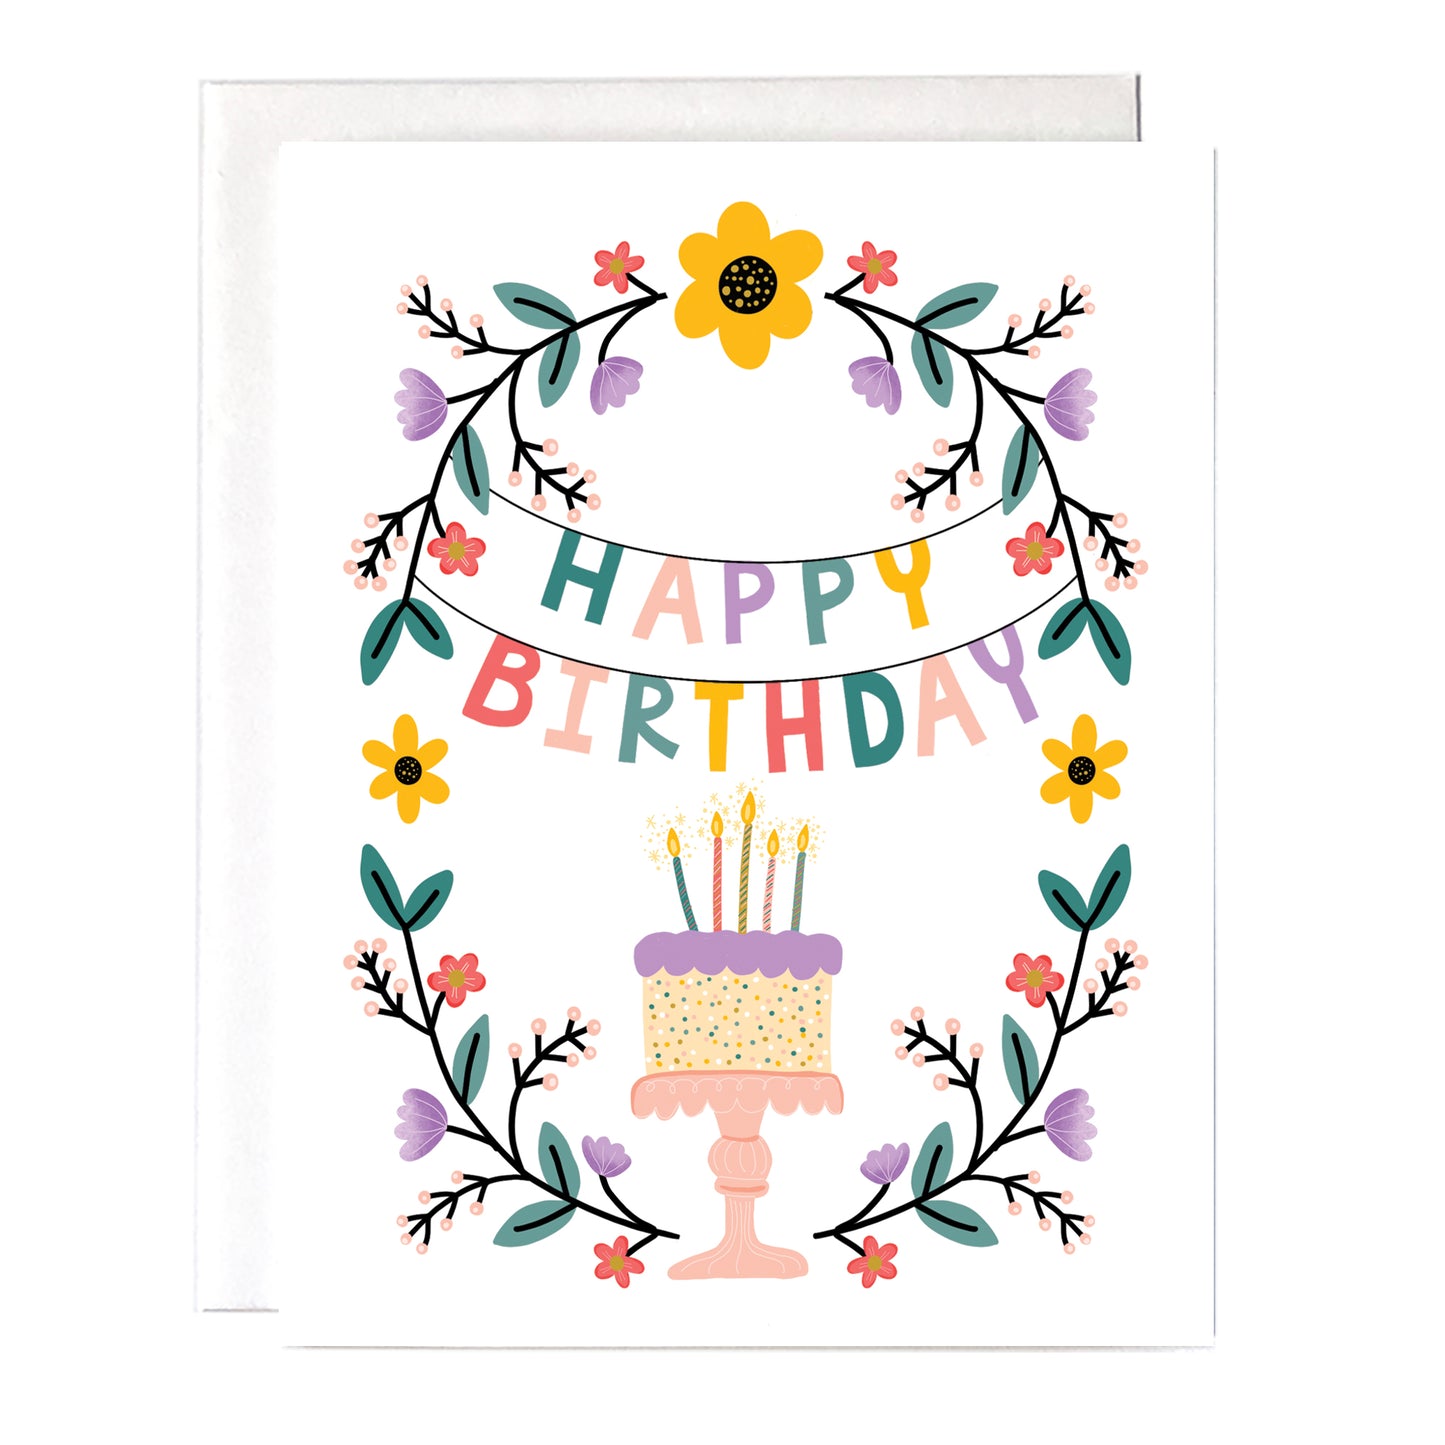 Birthday Card with beautiful floral design and birthday cake. Size A2 greeting card (4.25" x 5.5") with envelope, blank Inside. All cards are designed and Illustrated with love by me, Anna Fox, and are printed at my friendly neighborhood print shop in Denver, CO.